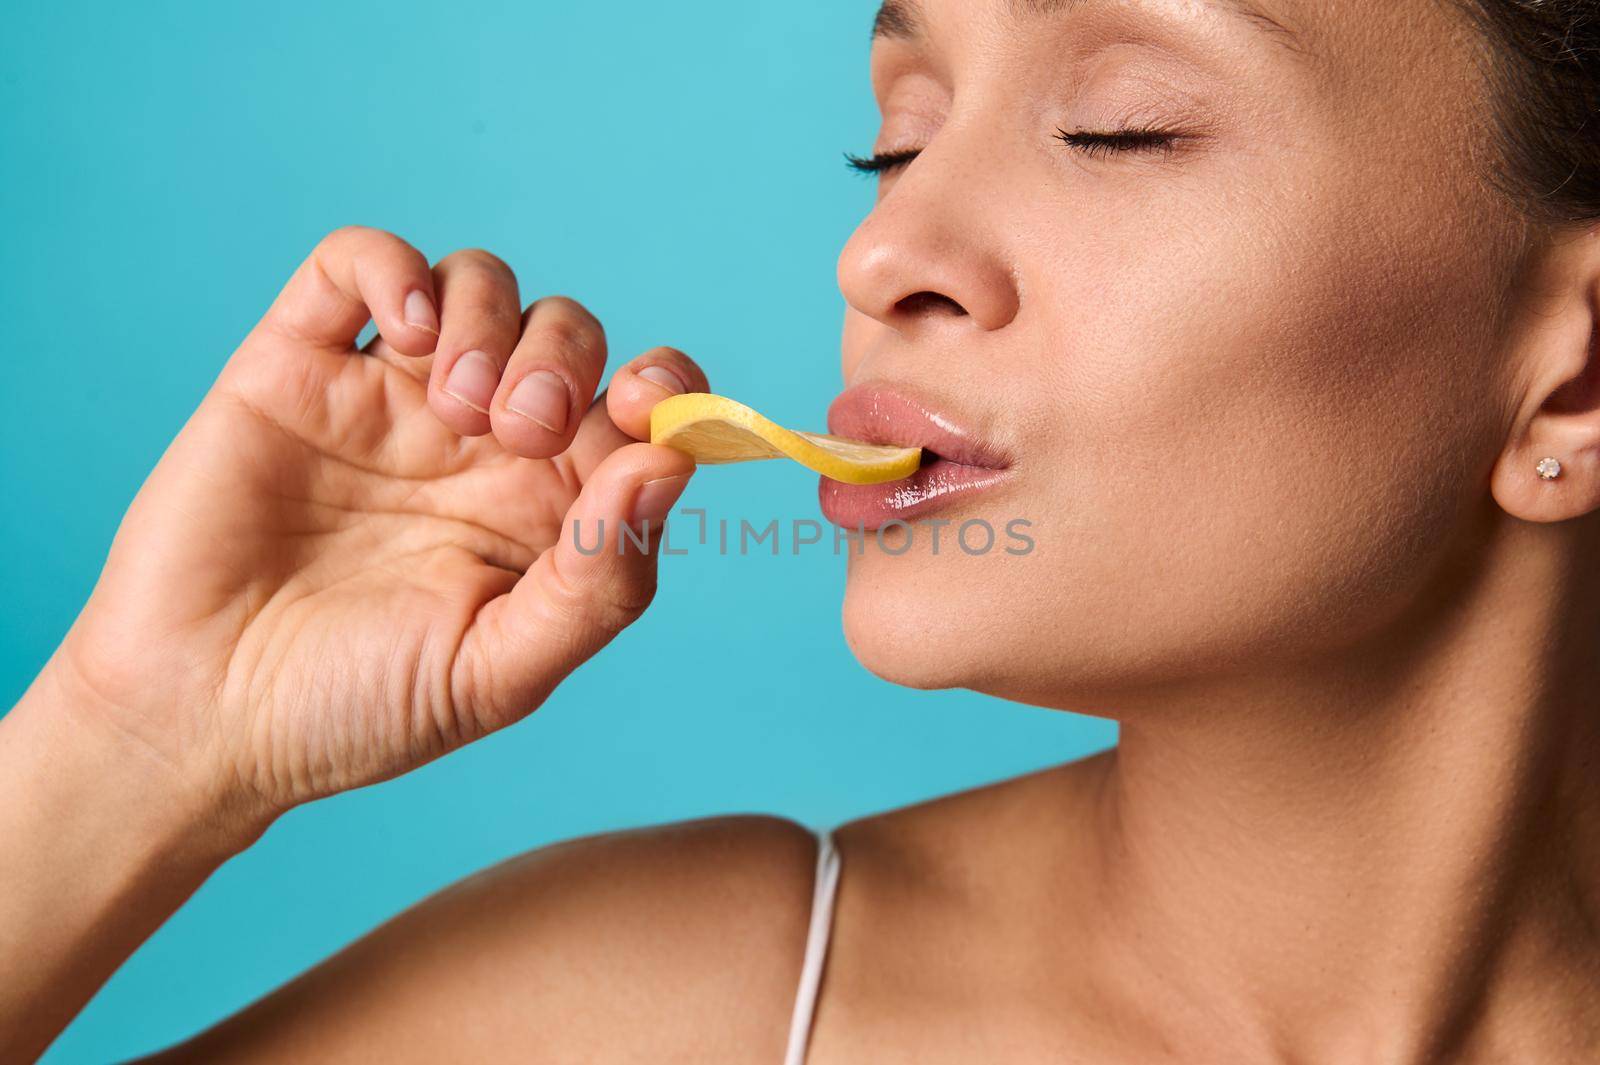 Headshot of a beautiful woman with healthy clean fresh glowing skin eating slice of lemon, posing with her eyes closed against bright blue colored background. Skin, body, health care concept. Close-up by artgf